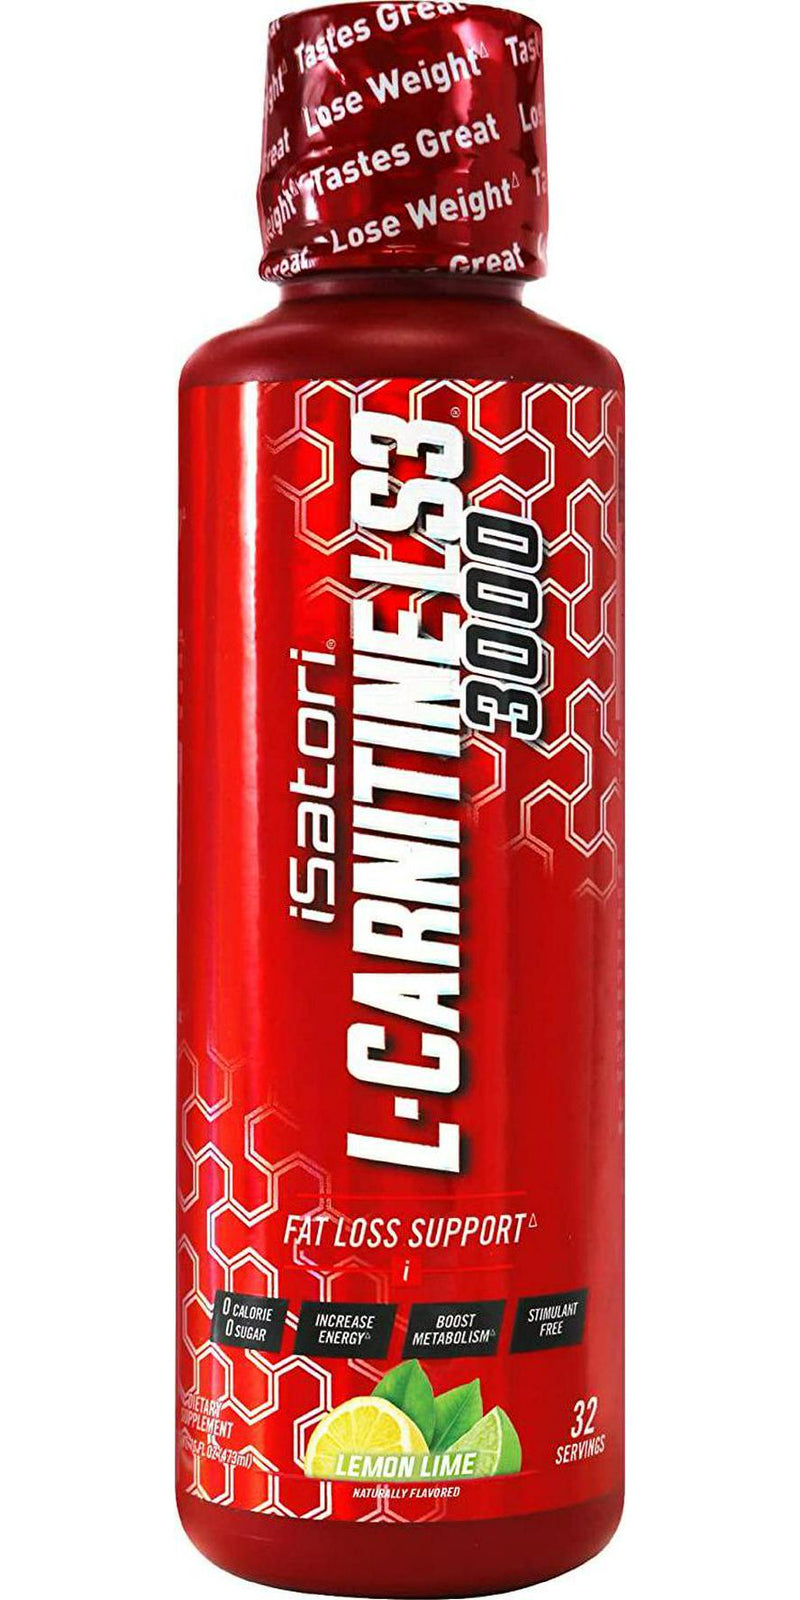 iSatori L-Carnitine LS3 Concentrated Liquid Fat Burner and Metabolism Activator - Fat Loss for Health and Fitness - Keto Friendly Weight Loss - Stimulant Free - Lemon Lime 3000mg (32 Servings)